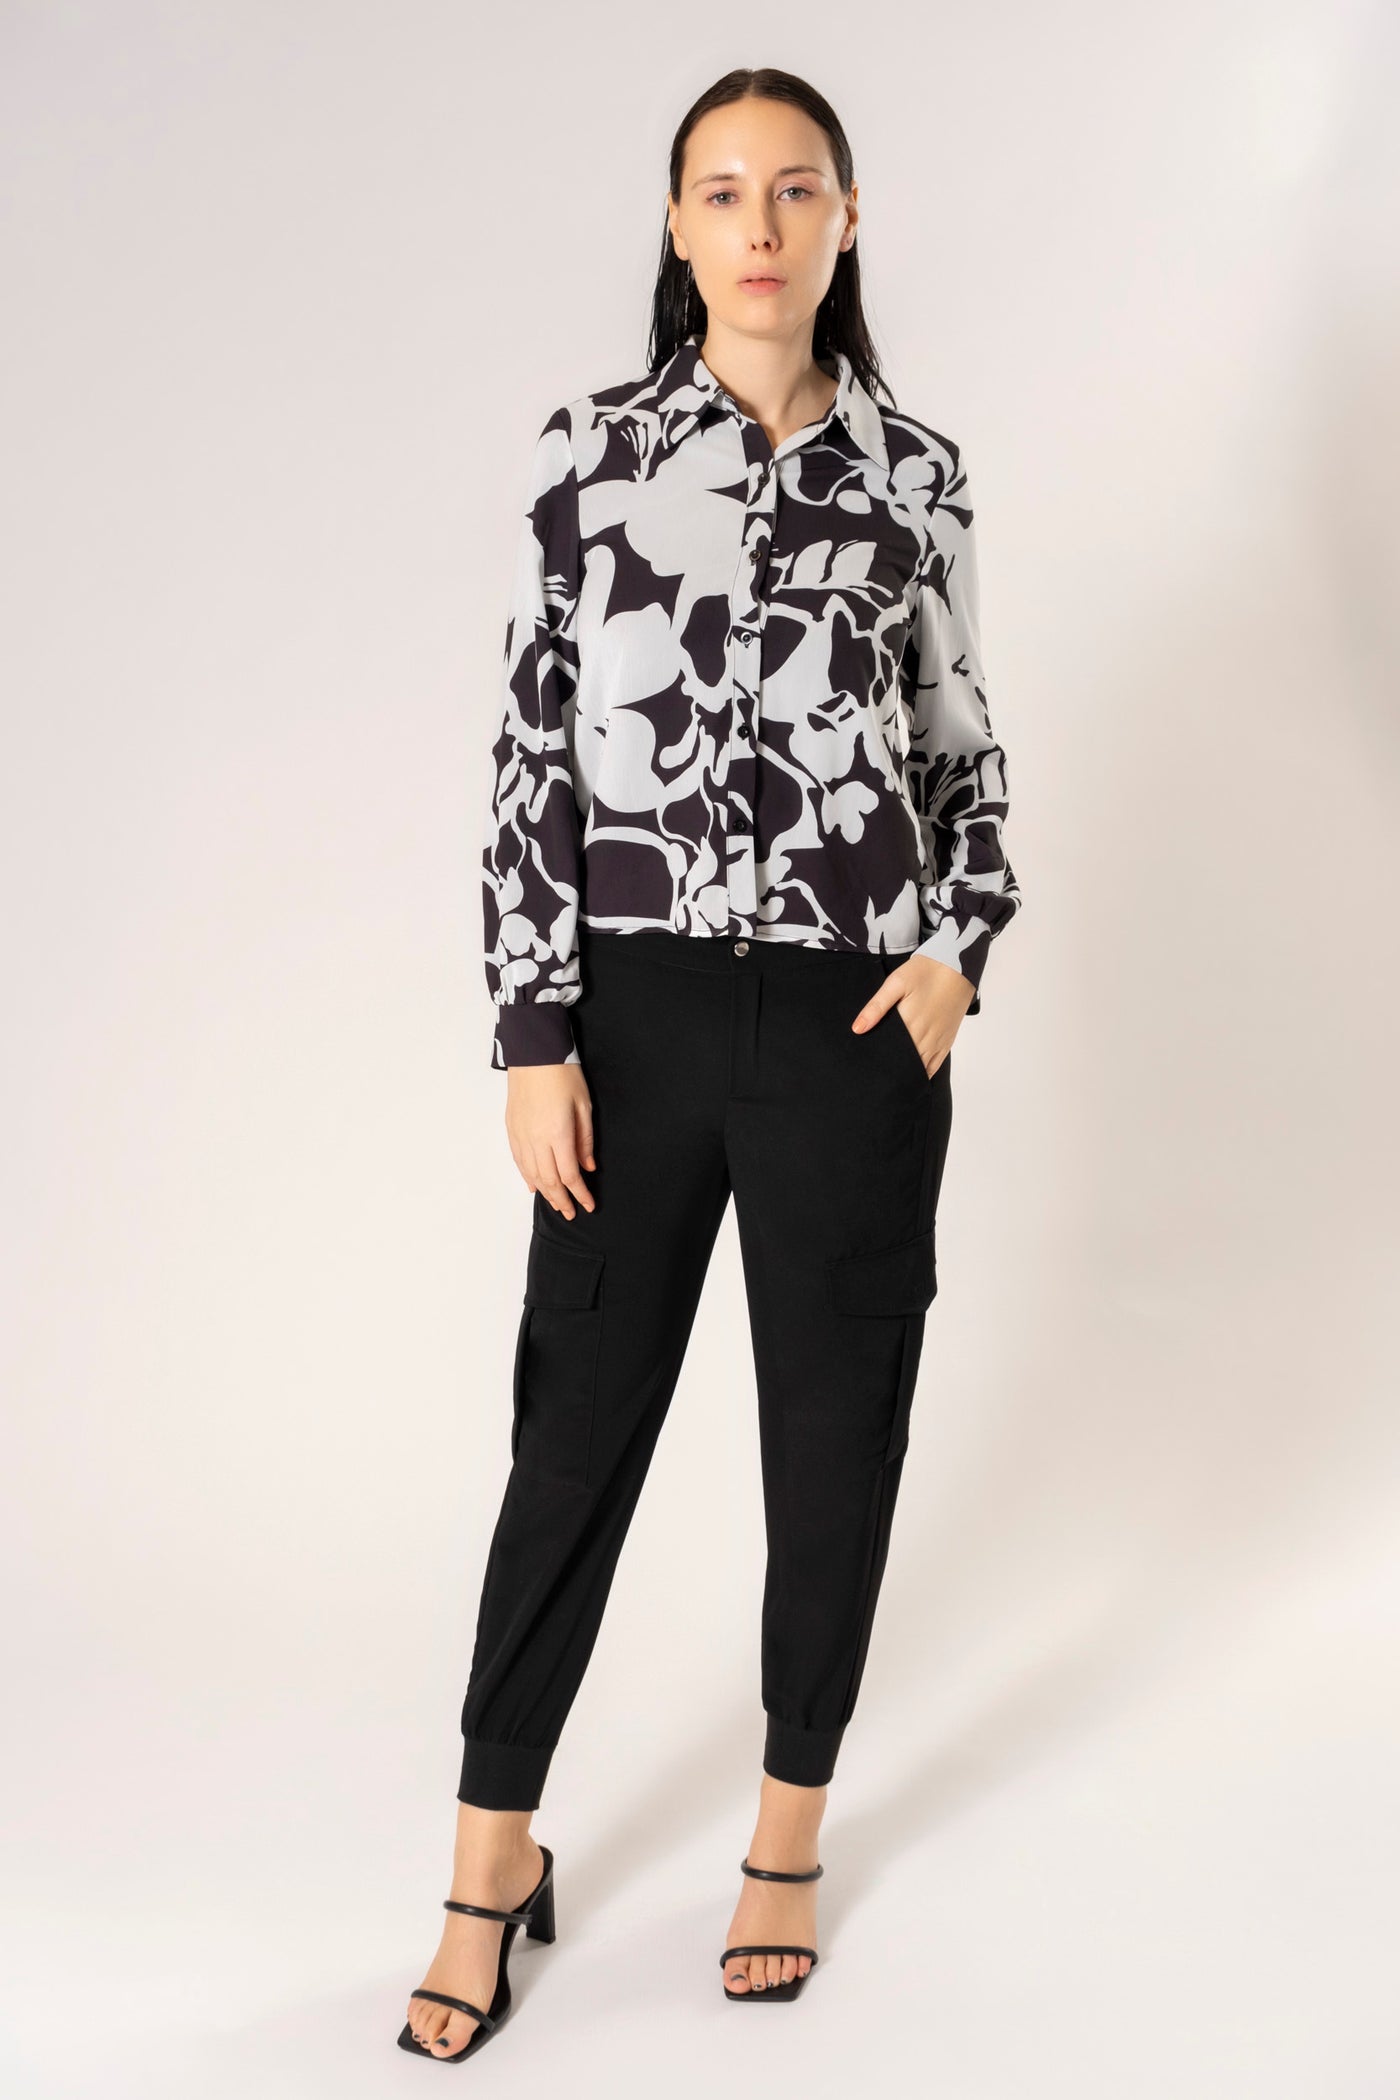 JANE LONG SLEEVE ABSTRACT FLORAL BUTTON UP TOP